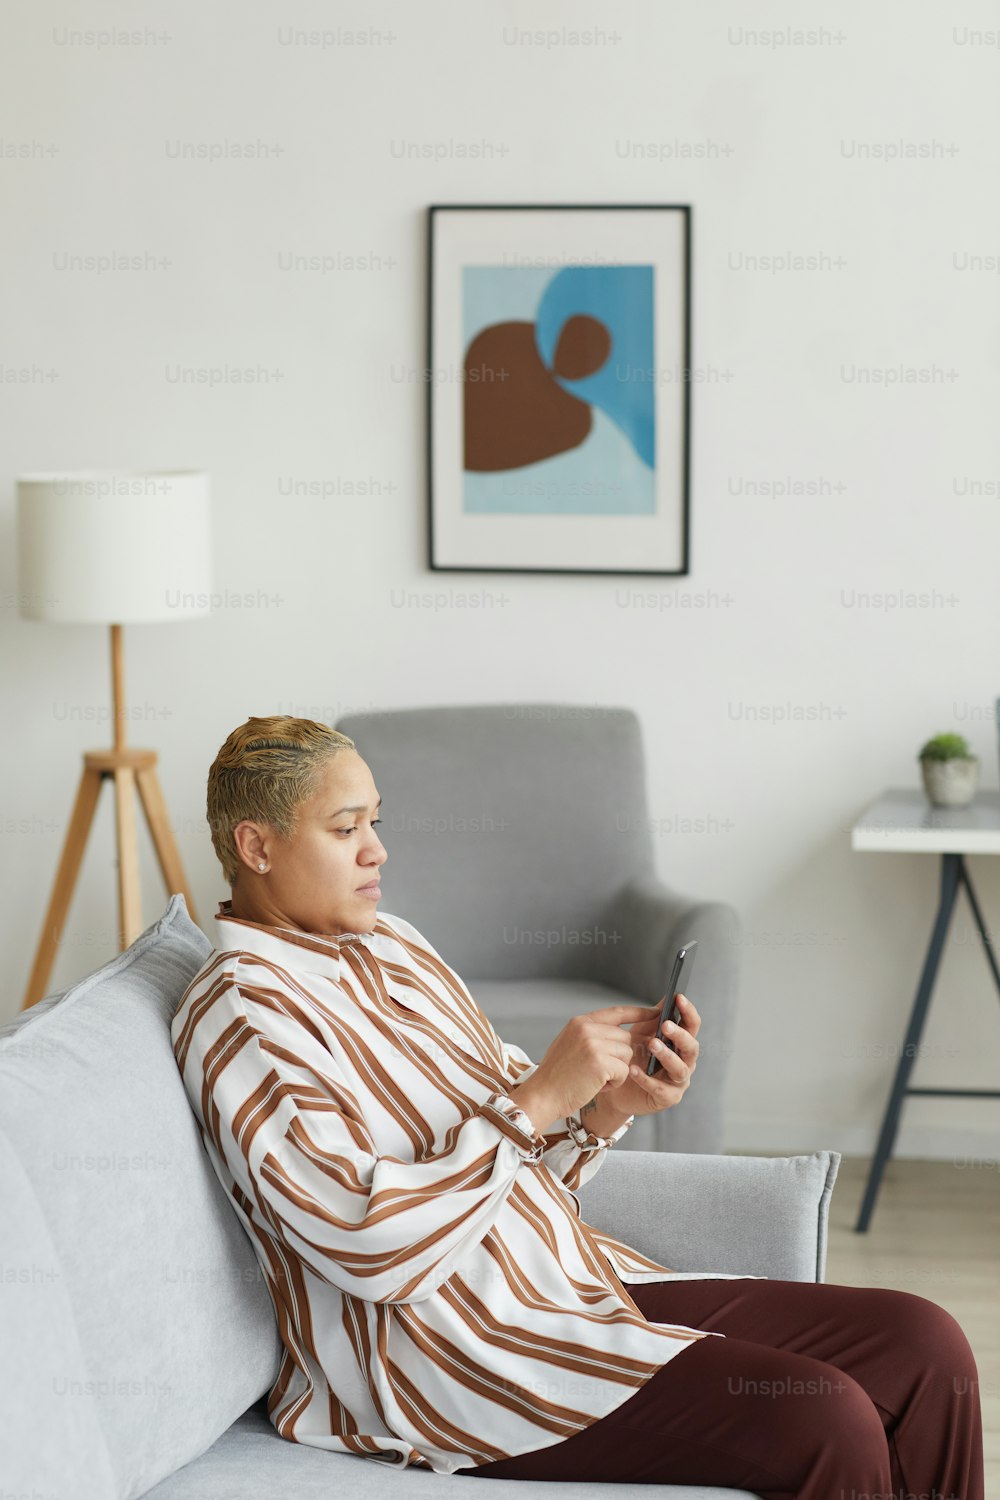 Vertical side view portrait of modern mixed raced woman using smartphone while sitting on sofa in minimal home interior